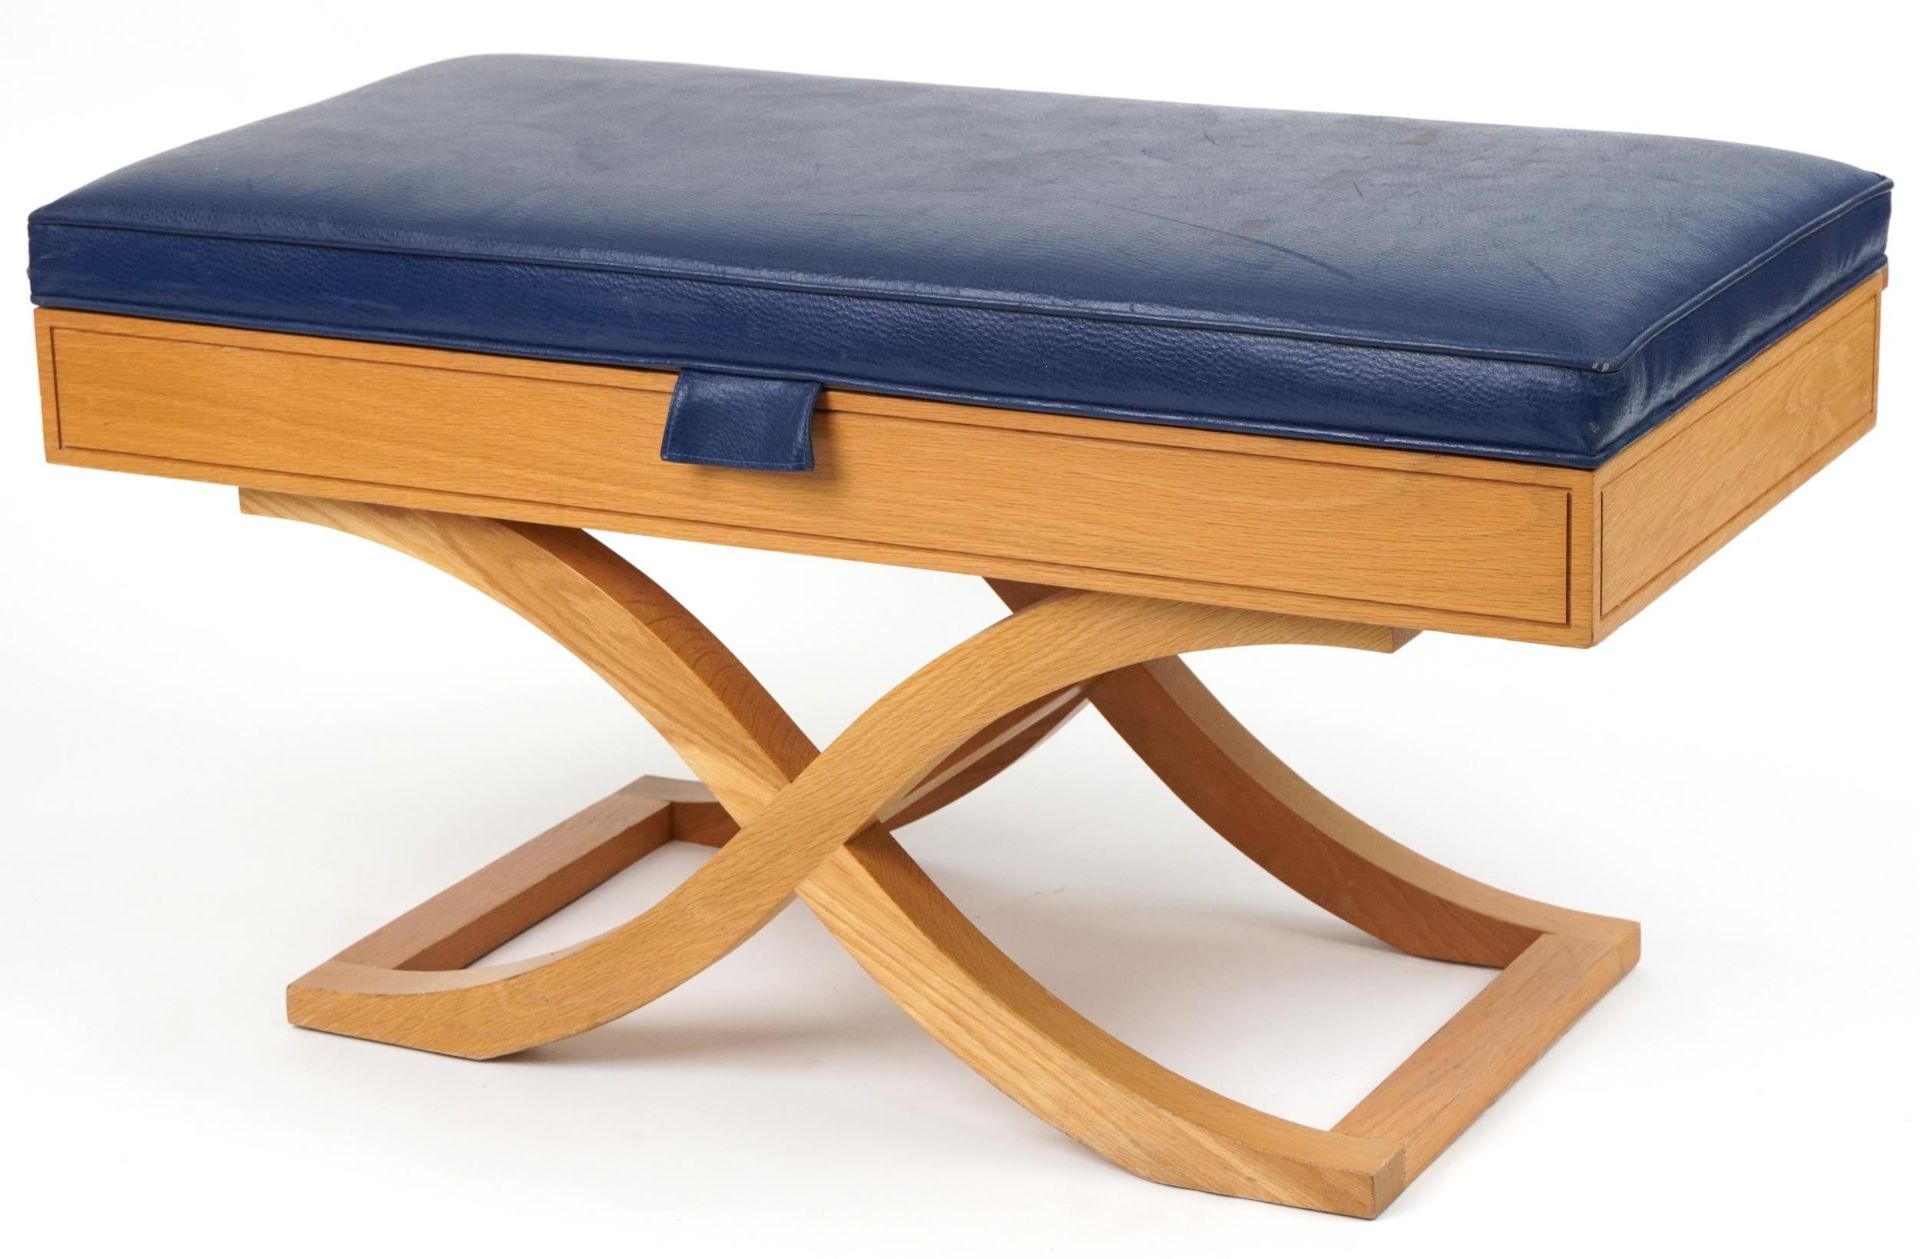 Contemporary light oak butler's luggage stand with blue leather upholstered cushioned seat, 55cm D x